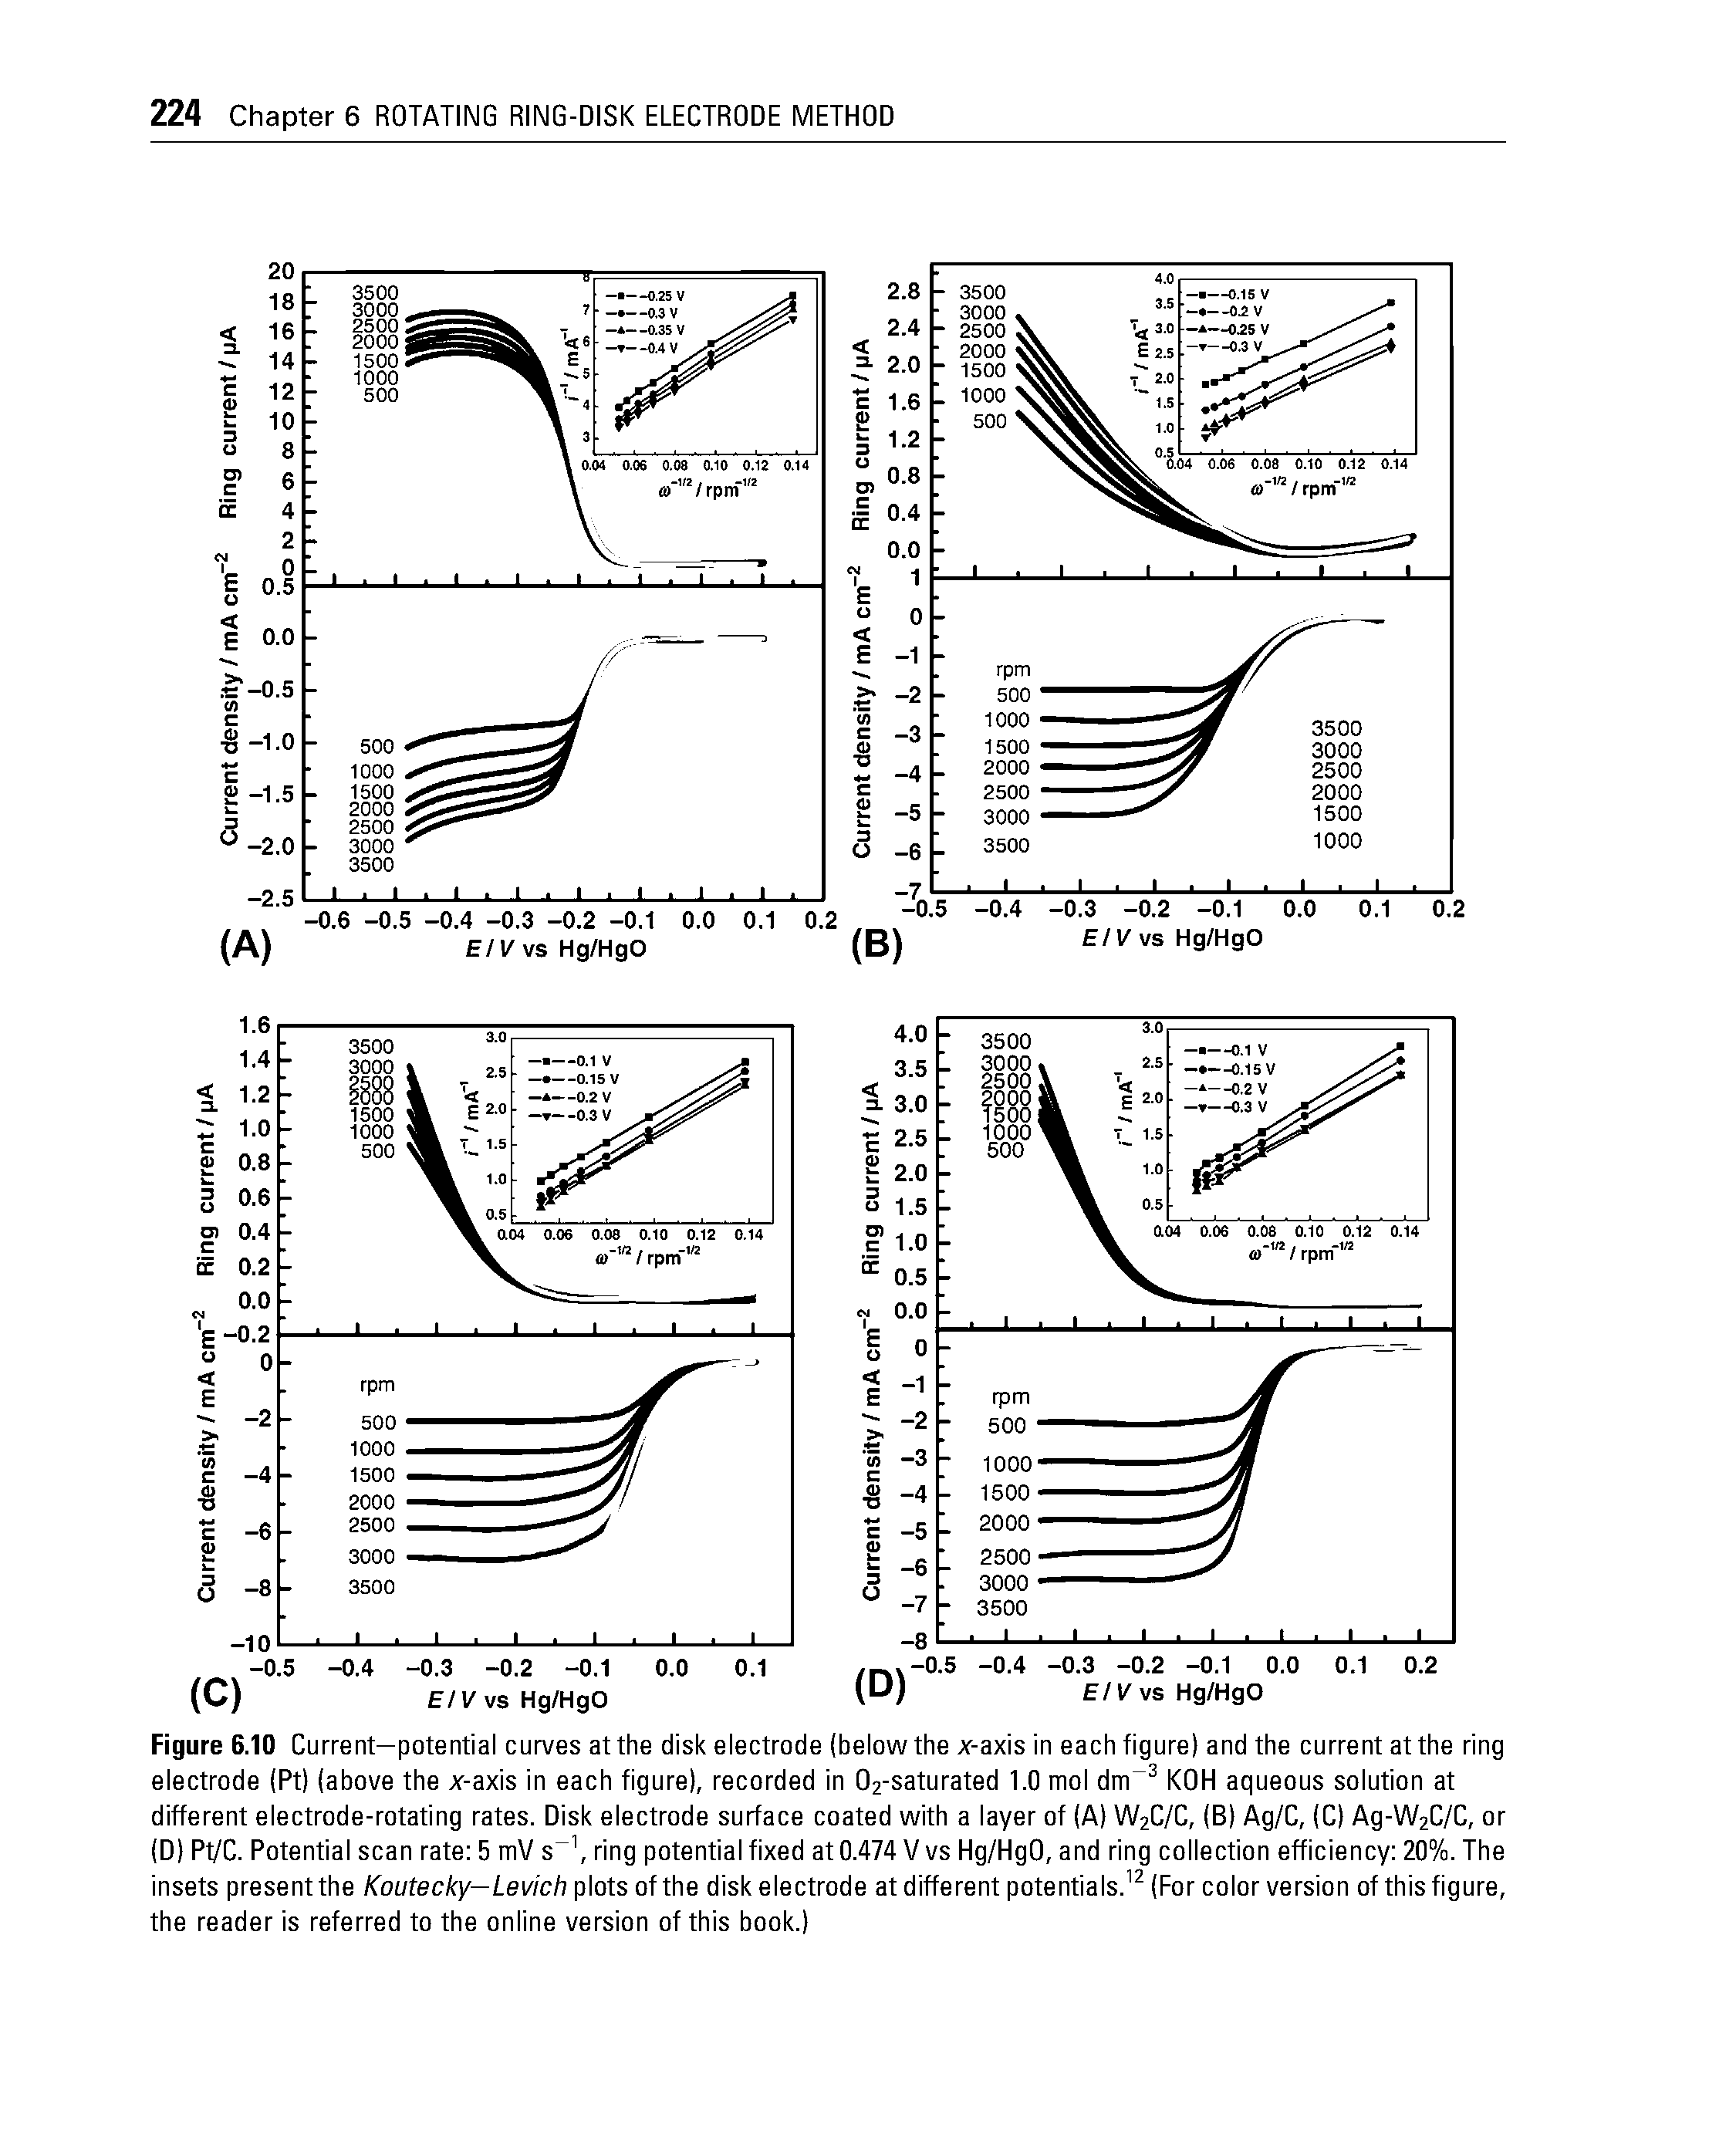 Figure 6.10 Current—potential curves at the disk electrode (below the x-axis in each figure) and the current at the ring electrode (Pt) (above the x-axis in each figure), recorded in Oa-saturated 1.0 mol dm KOH aqueous solution at different electrode-rotating rates. Disk electrode surface coated with a layer of (A) W2C/C, (B) Ag/C, (C) Ag-W2C/C, or (D) Pt/C. Potential scan rate 5 mV s ring potential fixed at 0.474 V vs Hg/HgO, and ring collection efficiency 20%. The insets present the Koutecky—Levich p ols of the disk electrode at different potentials. (For color version of this figure, the reader is referred to the online version of this book.)...